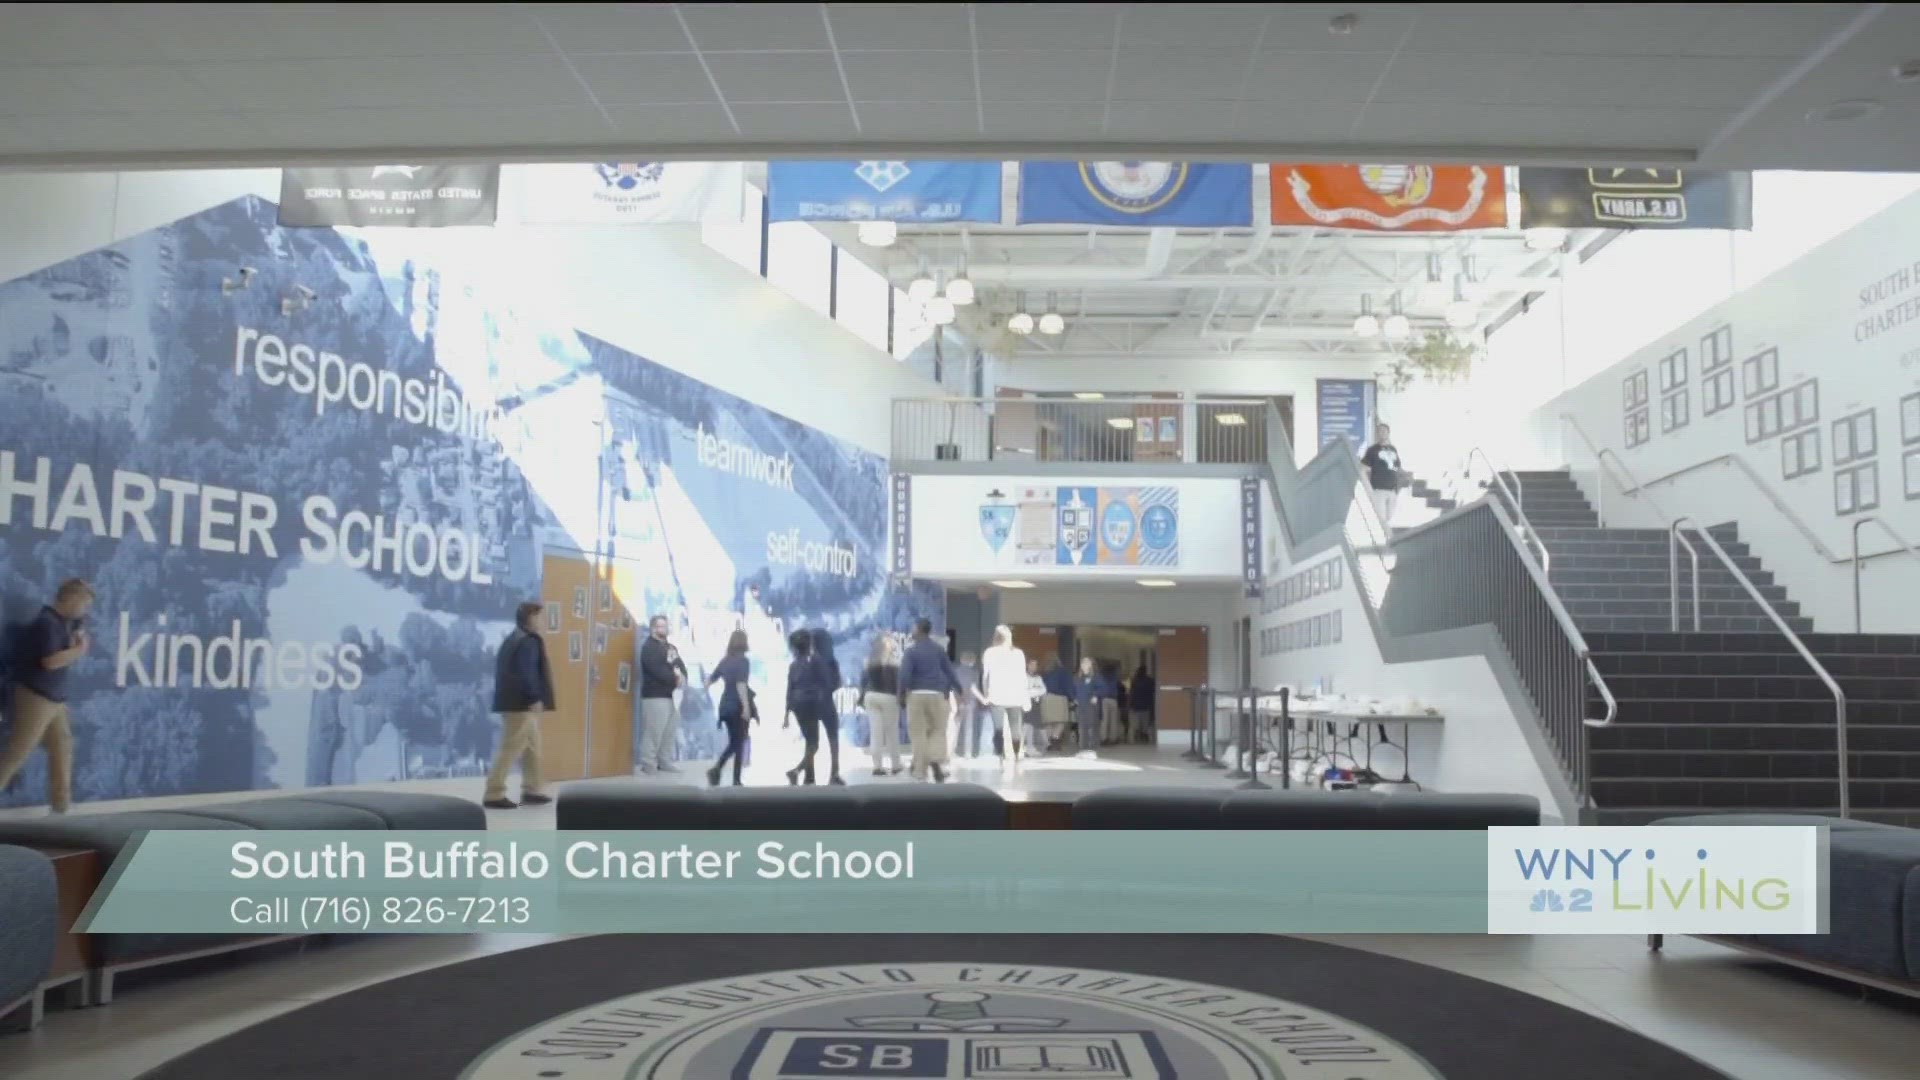 WNY Living - March 18th - South Buffalo Charter School - THIS VIDEO IS SPONSORED BY SOUTH BUFFALO CHARTER SCHOOL